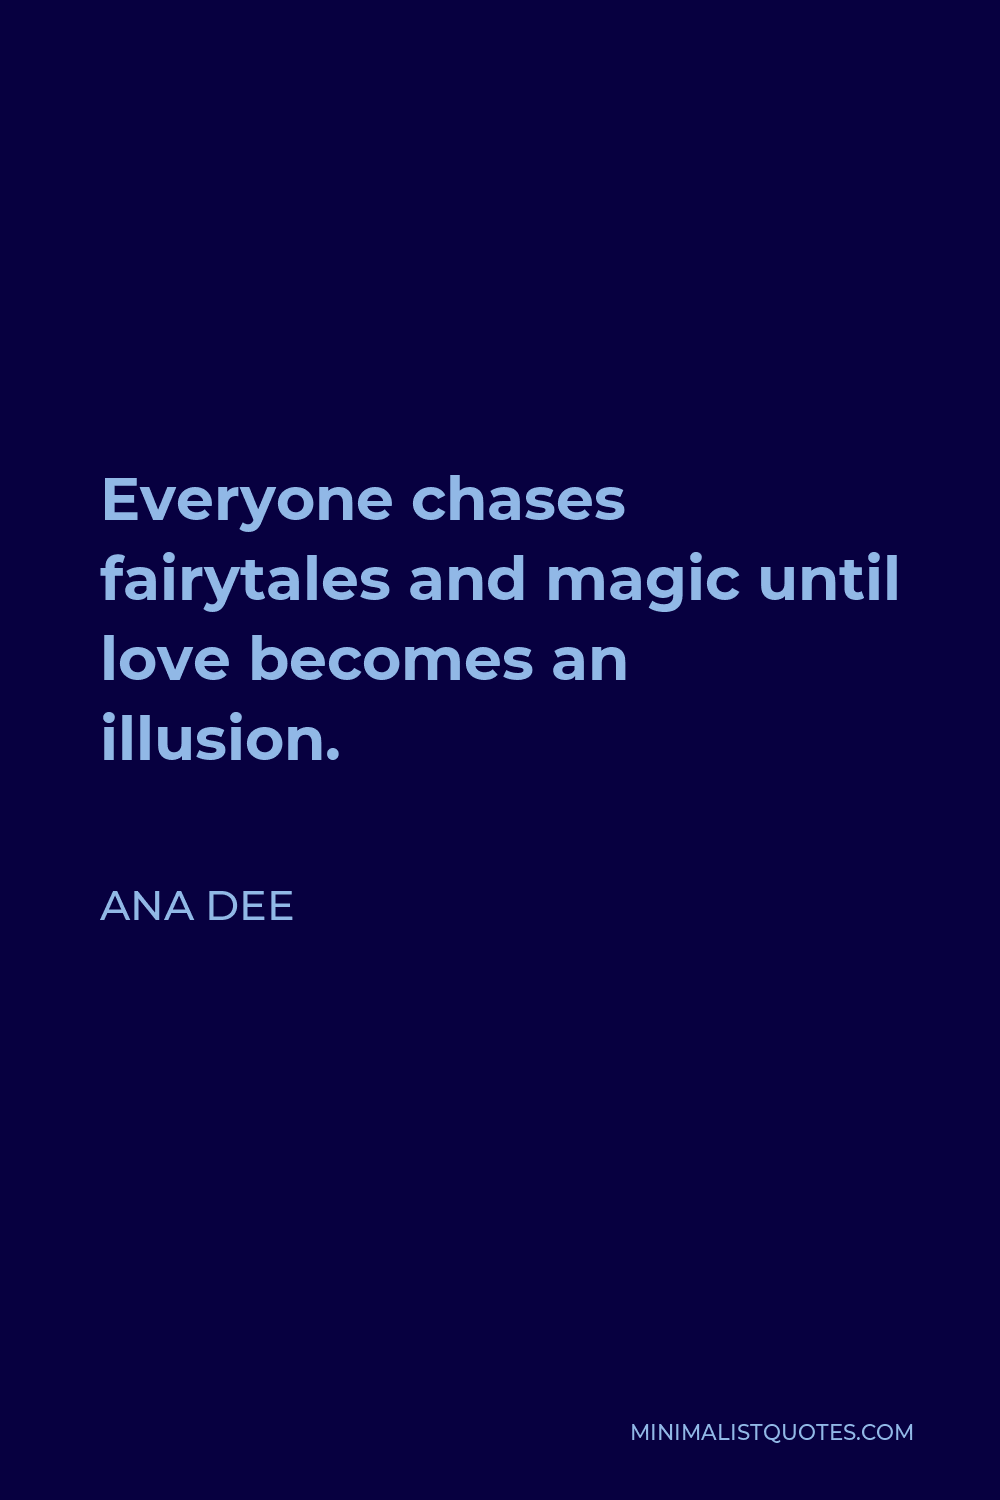 Ana Dee Quote - Everyone chases fairytales and magic until love becomes an illusion.